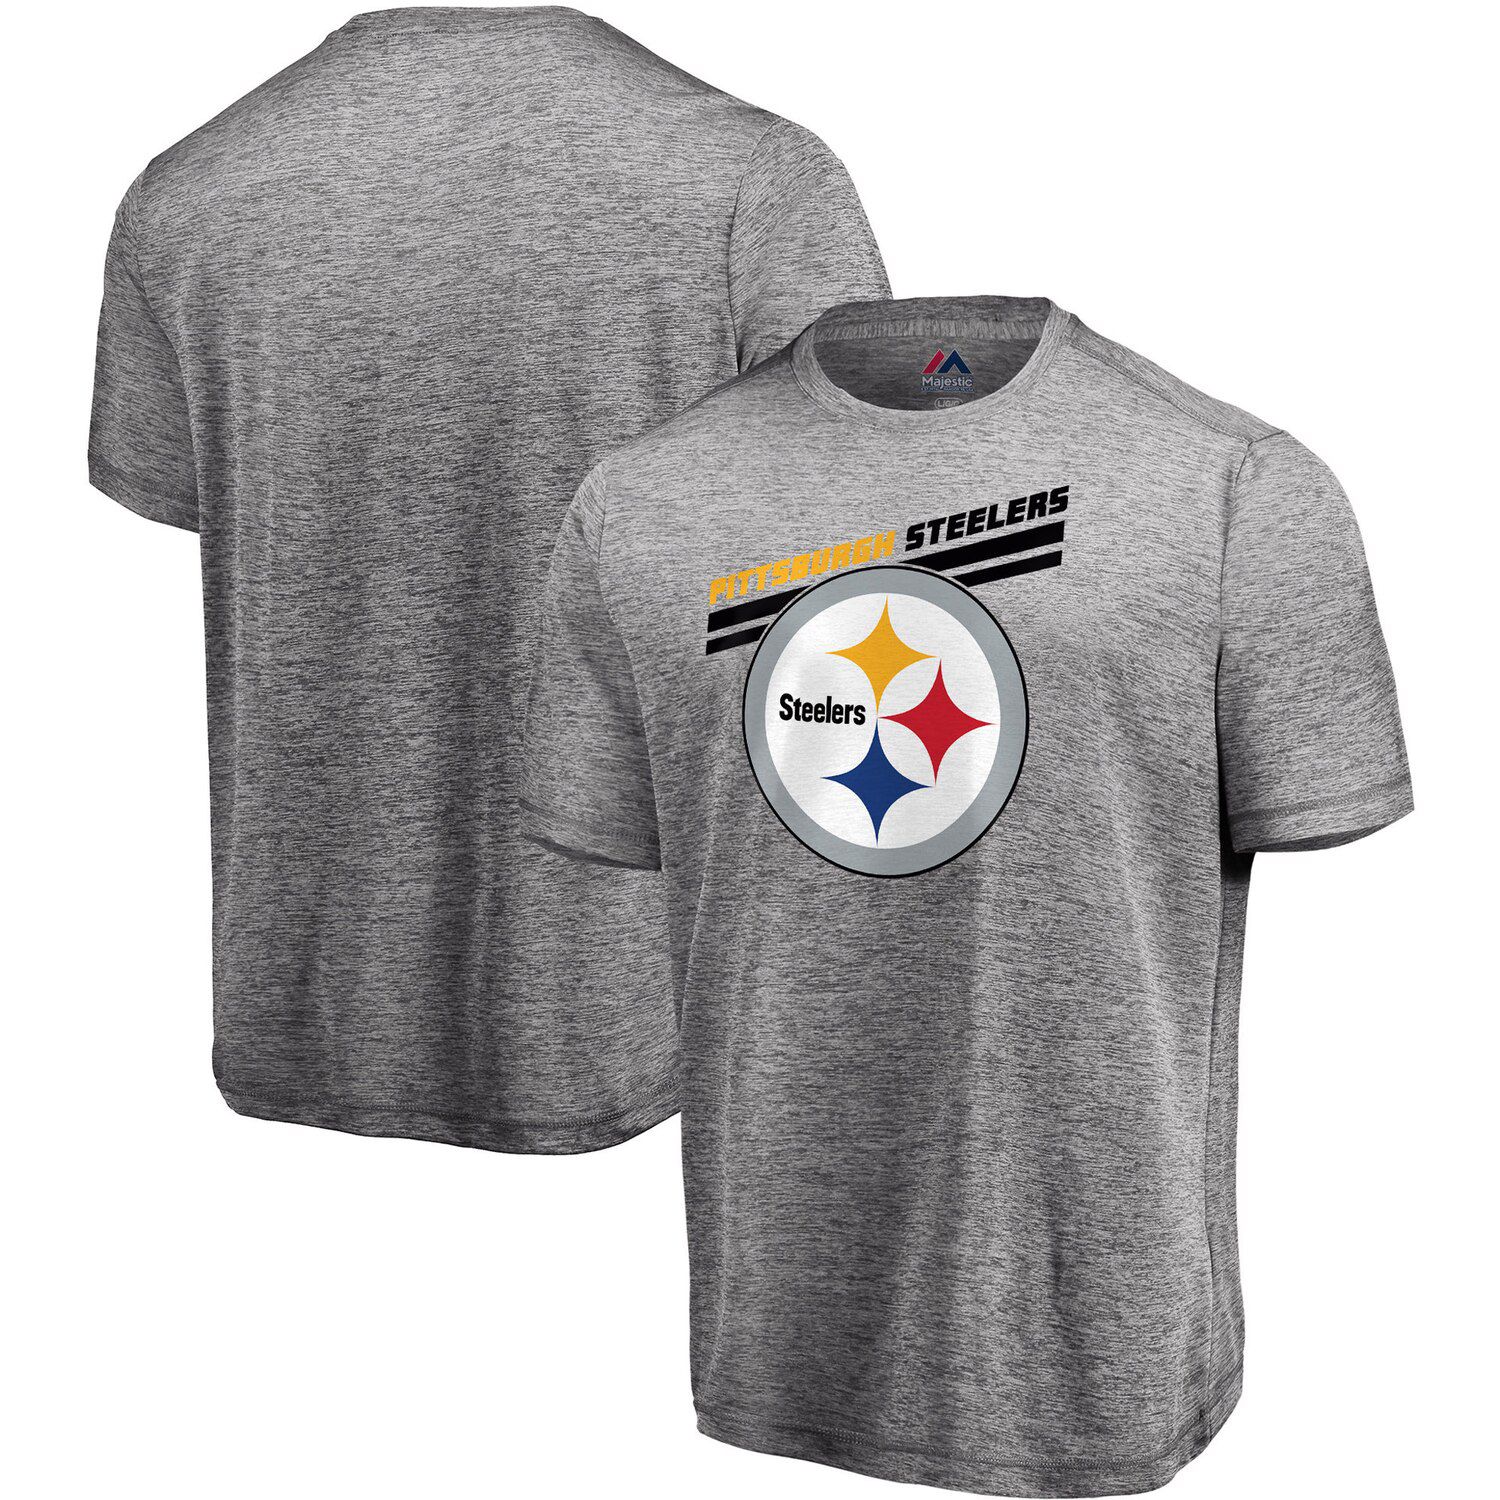 pittsburgh steelers men's t shirts